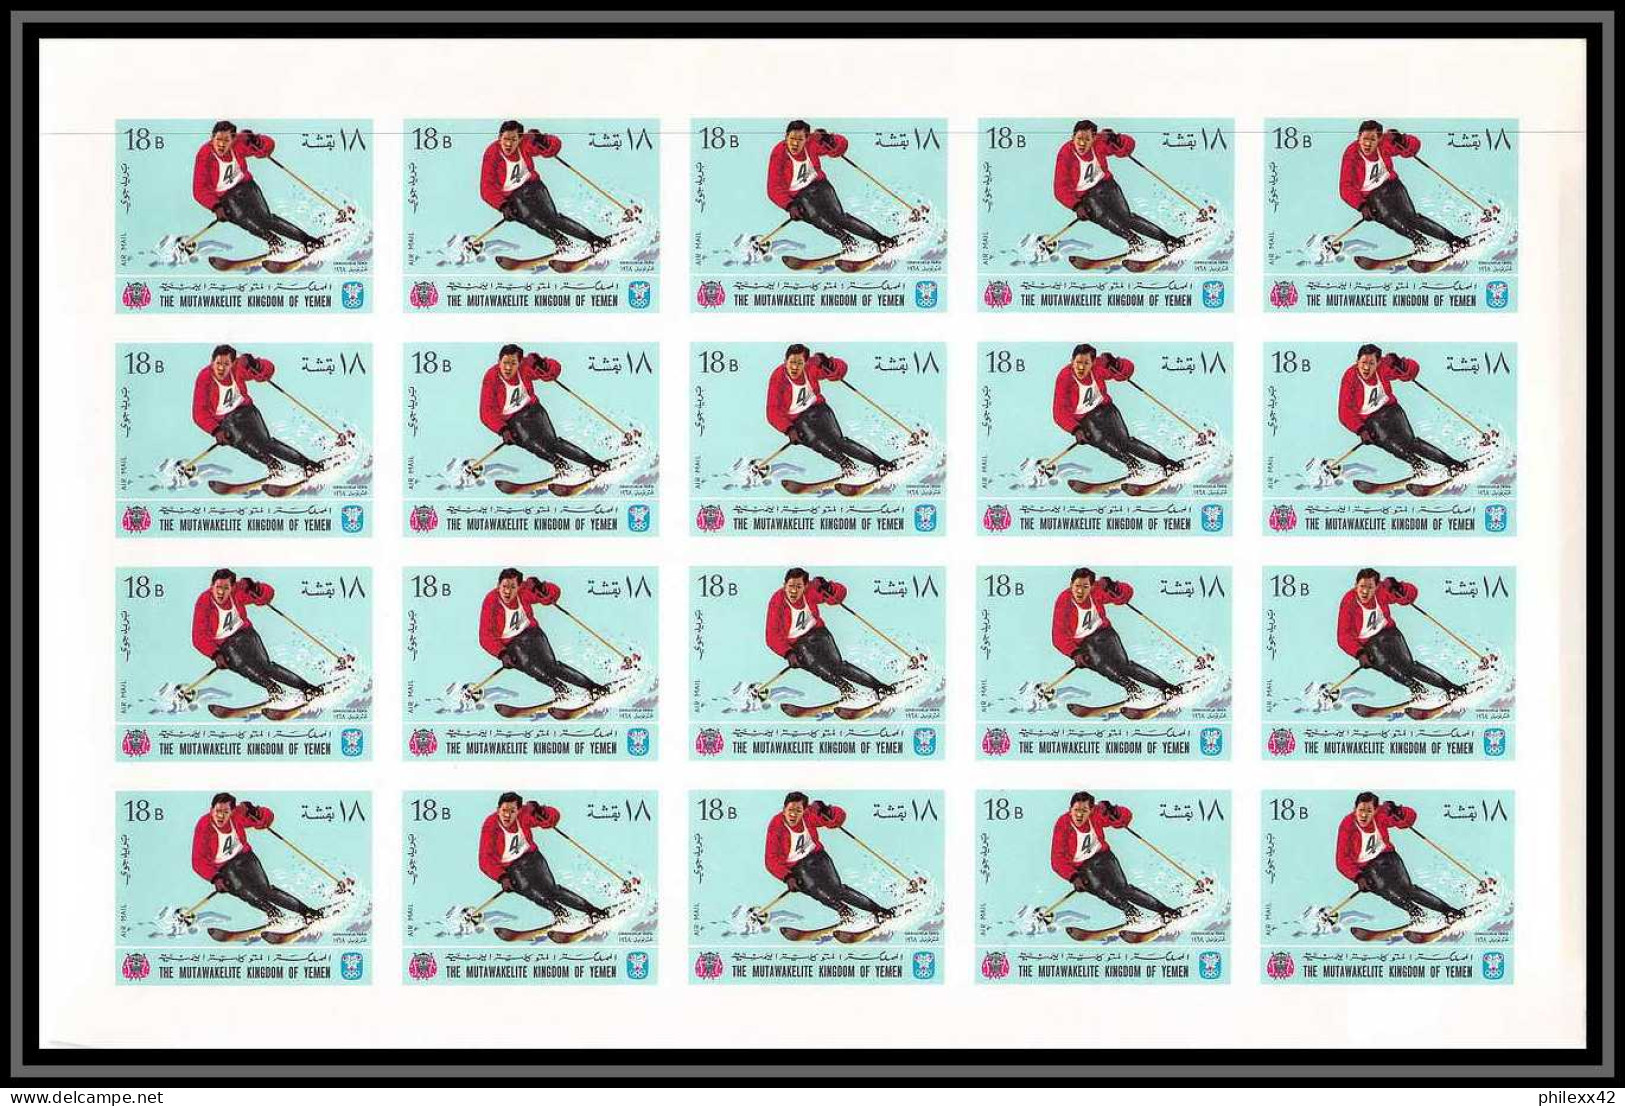 135b Yemen royaume MNH ** N° 454 / 463 B jeux olympiques olympic games grenoble 68 feuilles (sheets) non dentelé (Imperf